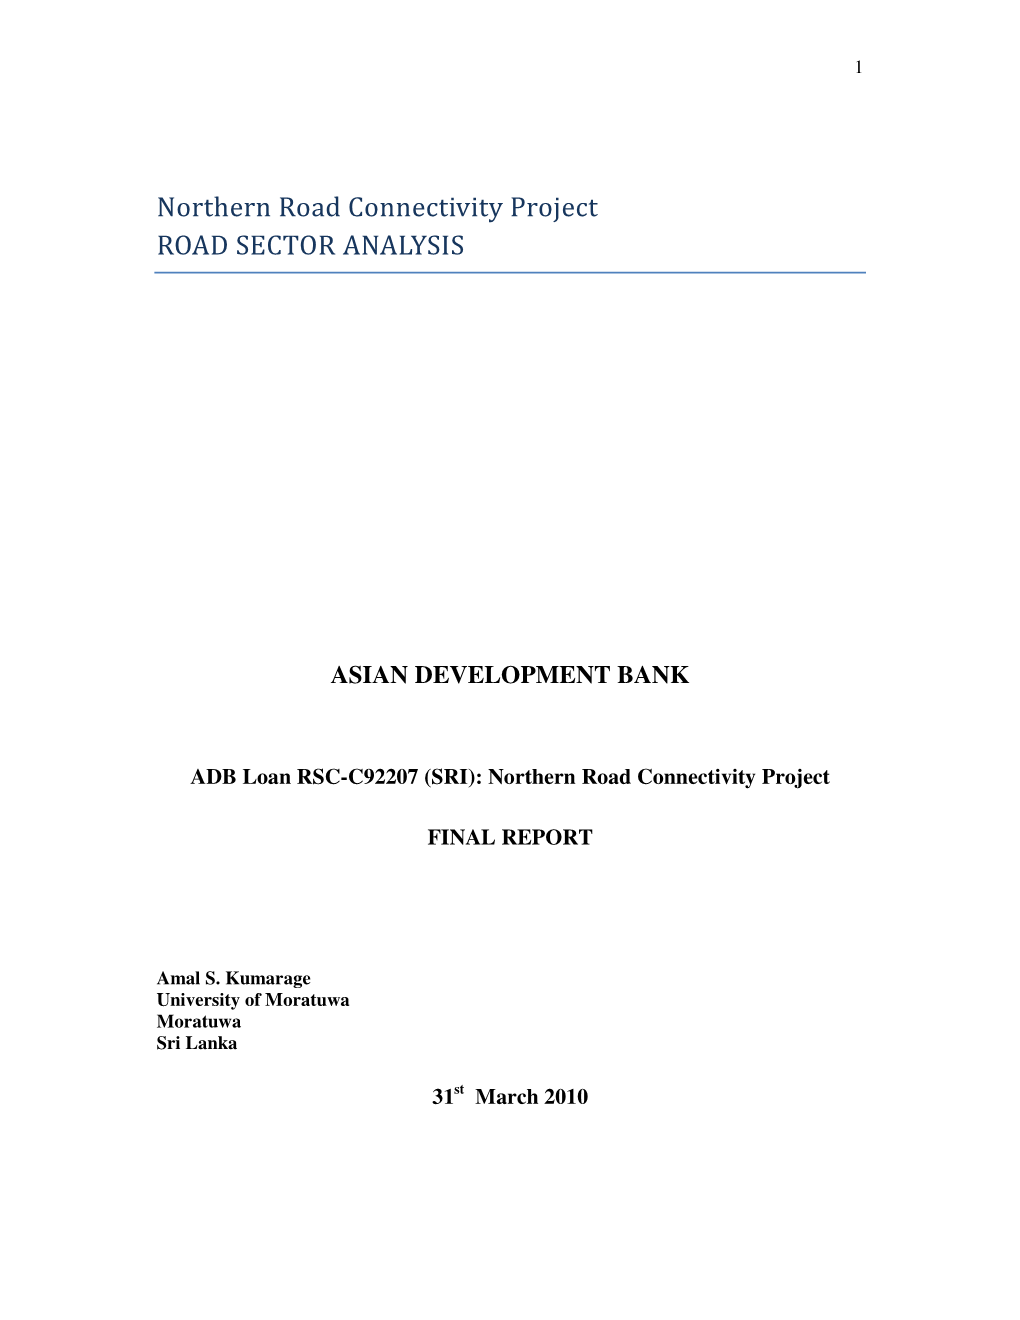 Northern Road Connectivity Project ROAD SECTOR ANALYSIS